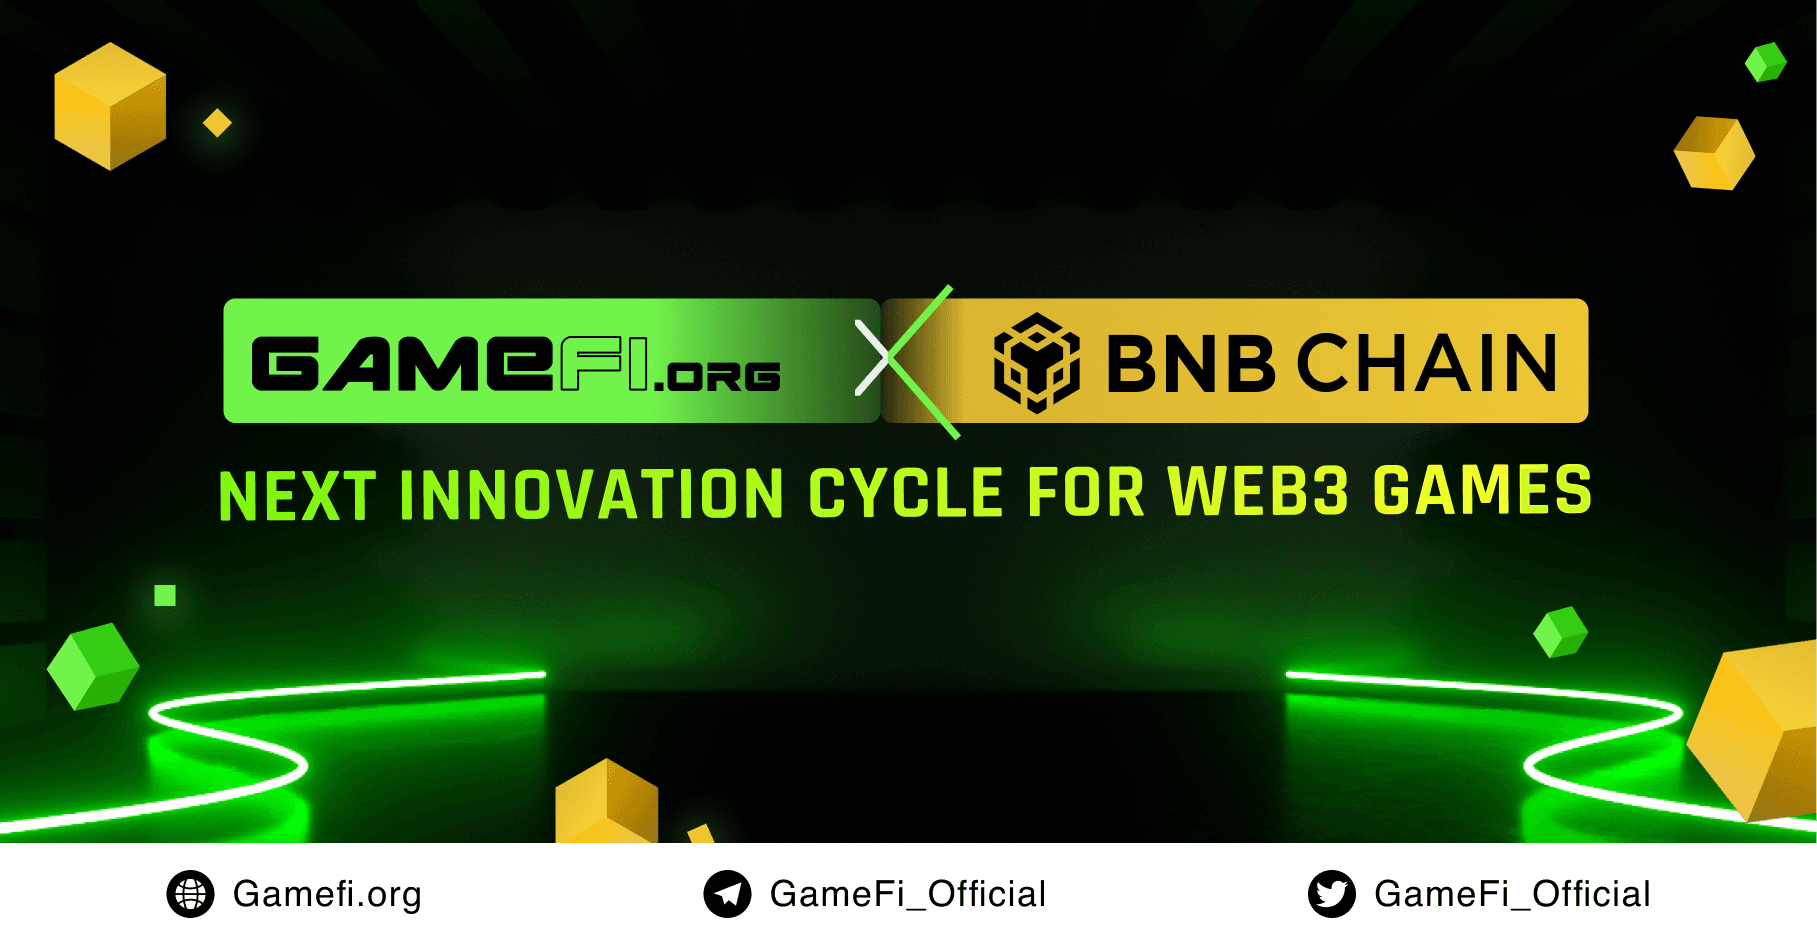 GameFi.org & BNB Chain: New Innovation Cycle for Web3 Gaming